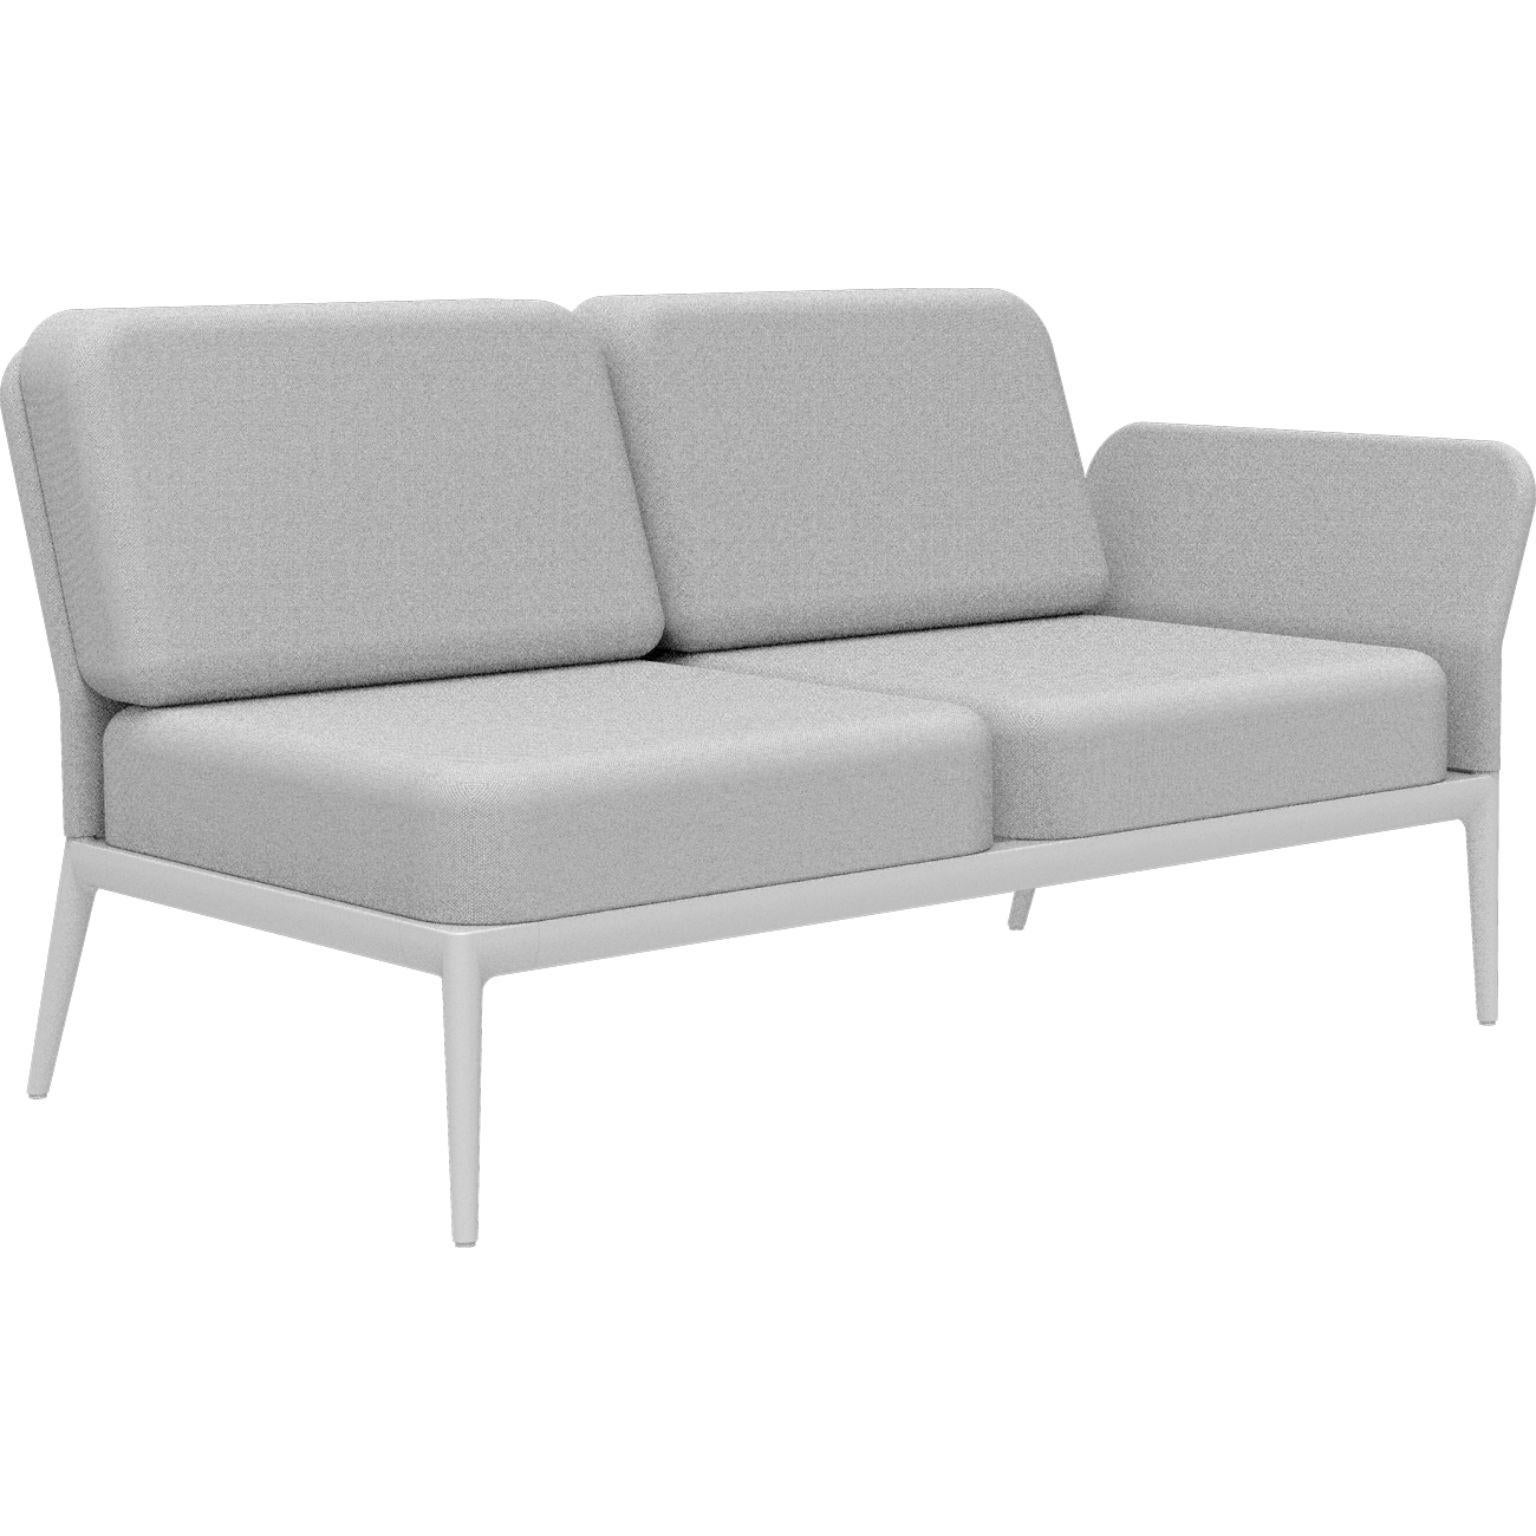 Cover White Double Left Modular Sofa by MOWEE
Dimensions: D83 x W148 x H81 cm (seat height 42 cm)
Material: Aluminum and upholstery.
Weight: 29 kg.
Also available in different colors and finishes. Please contact us.

An unmistakable collection